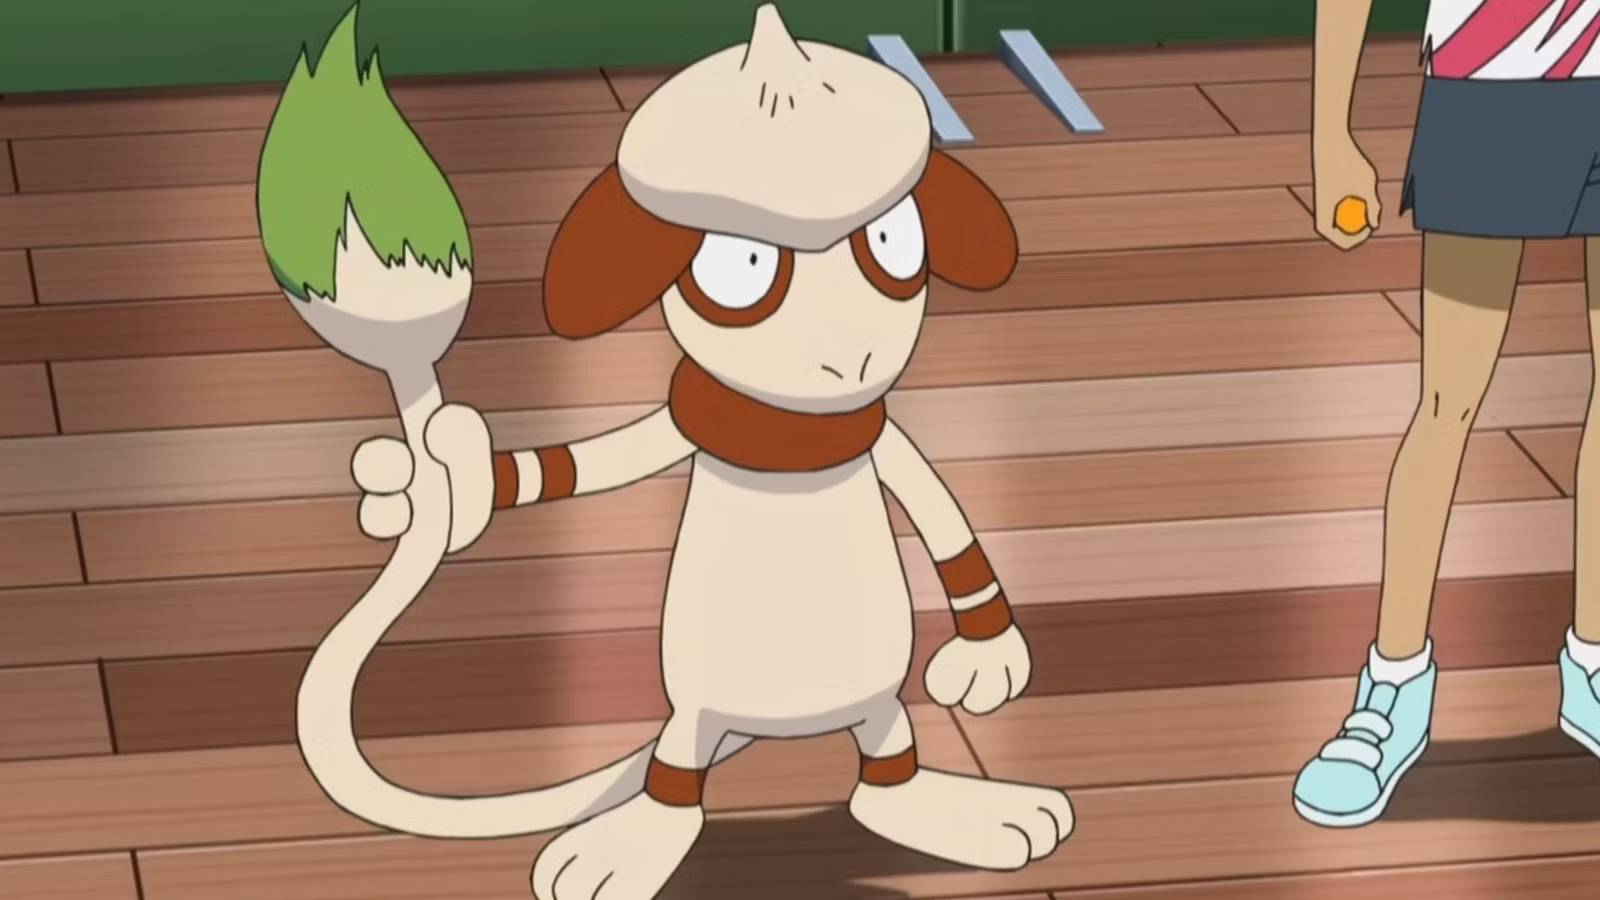 The Pokemon Smeargle stands in the middle of a room, holding its tail like a paintbrush